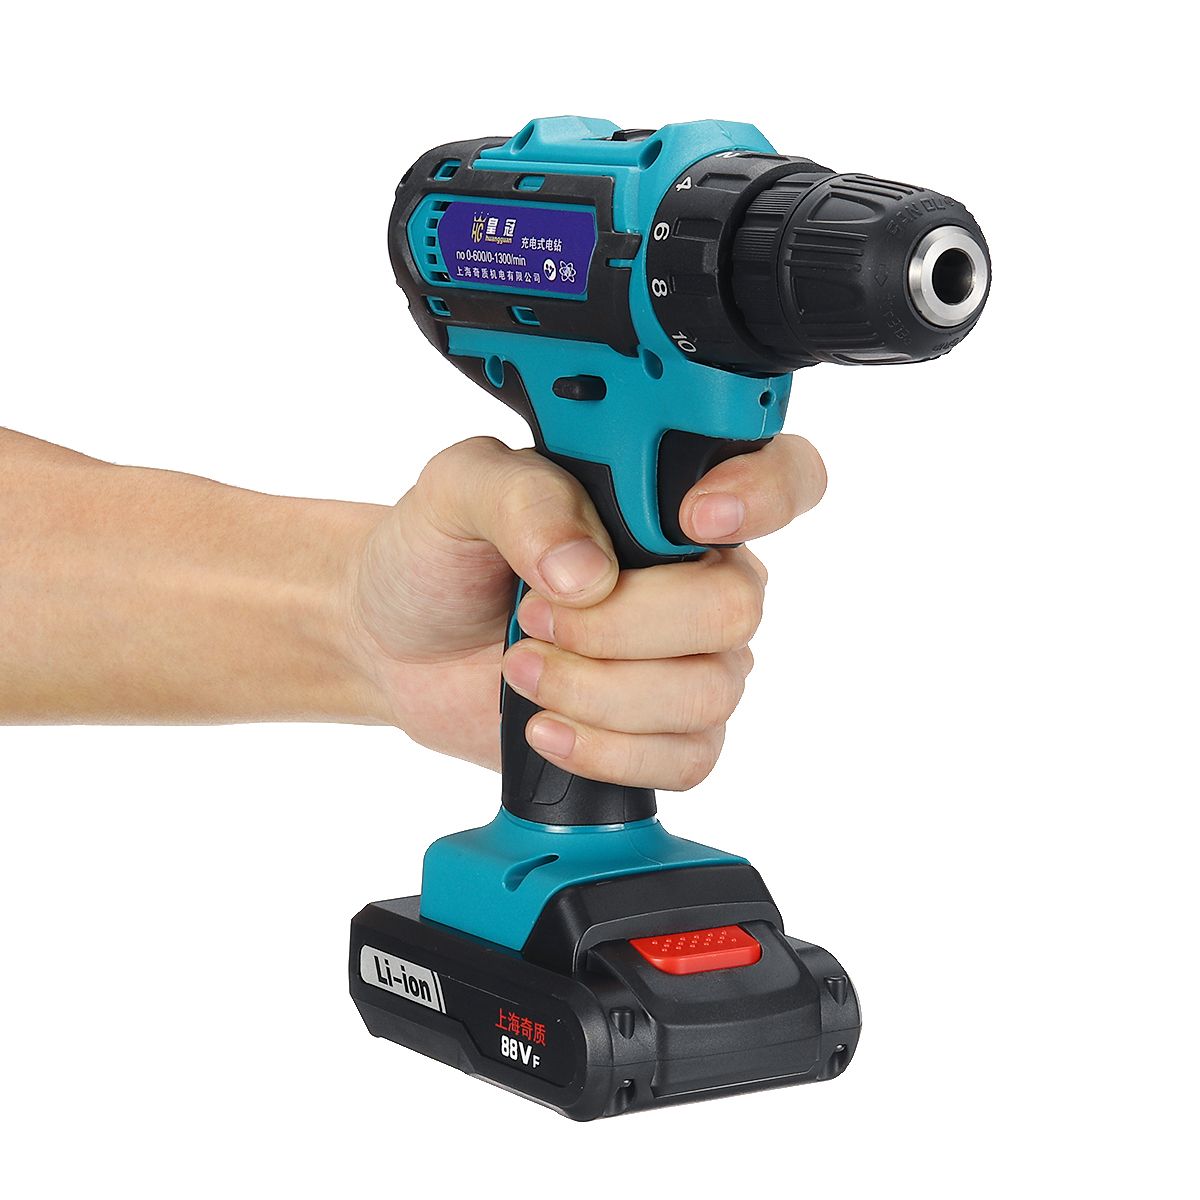 Drillpro-88VF-Cordless-Electric-Drill-Rechargeable-Screwdriver-181-Torque-W-2-Li-ion-Battery-1568759